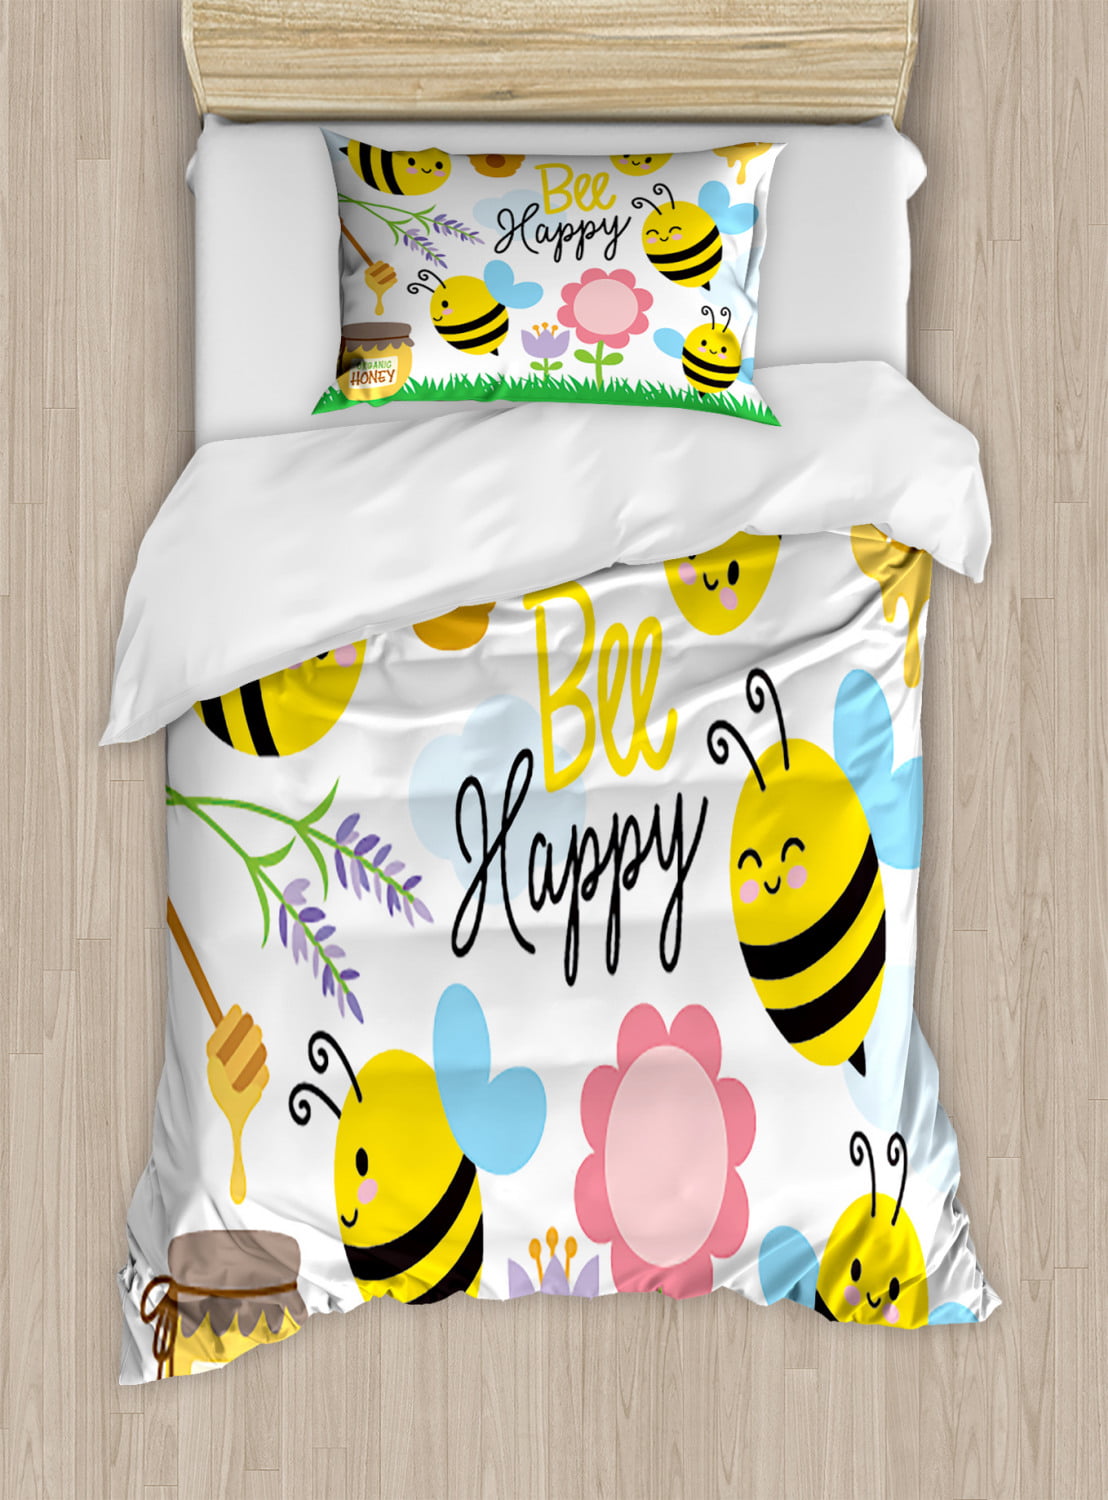 BEE HAPPY DUVET COVER  QUILT COVER SET WITH PILLOW CASES REVERSABEL BEDDING SET 